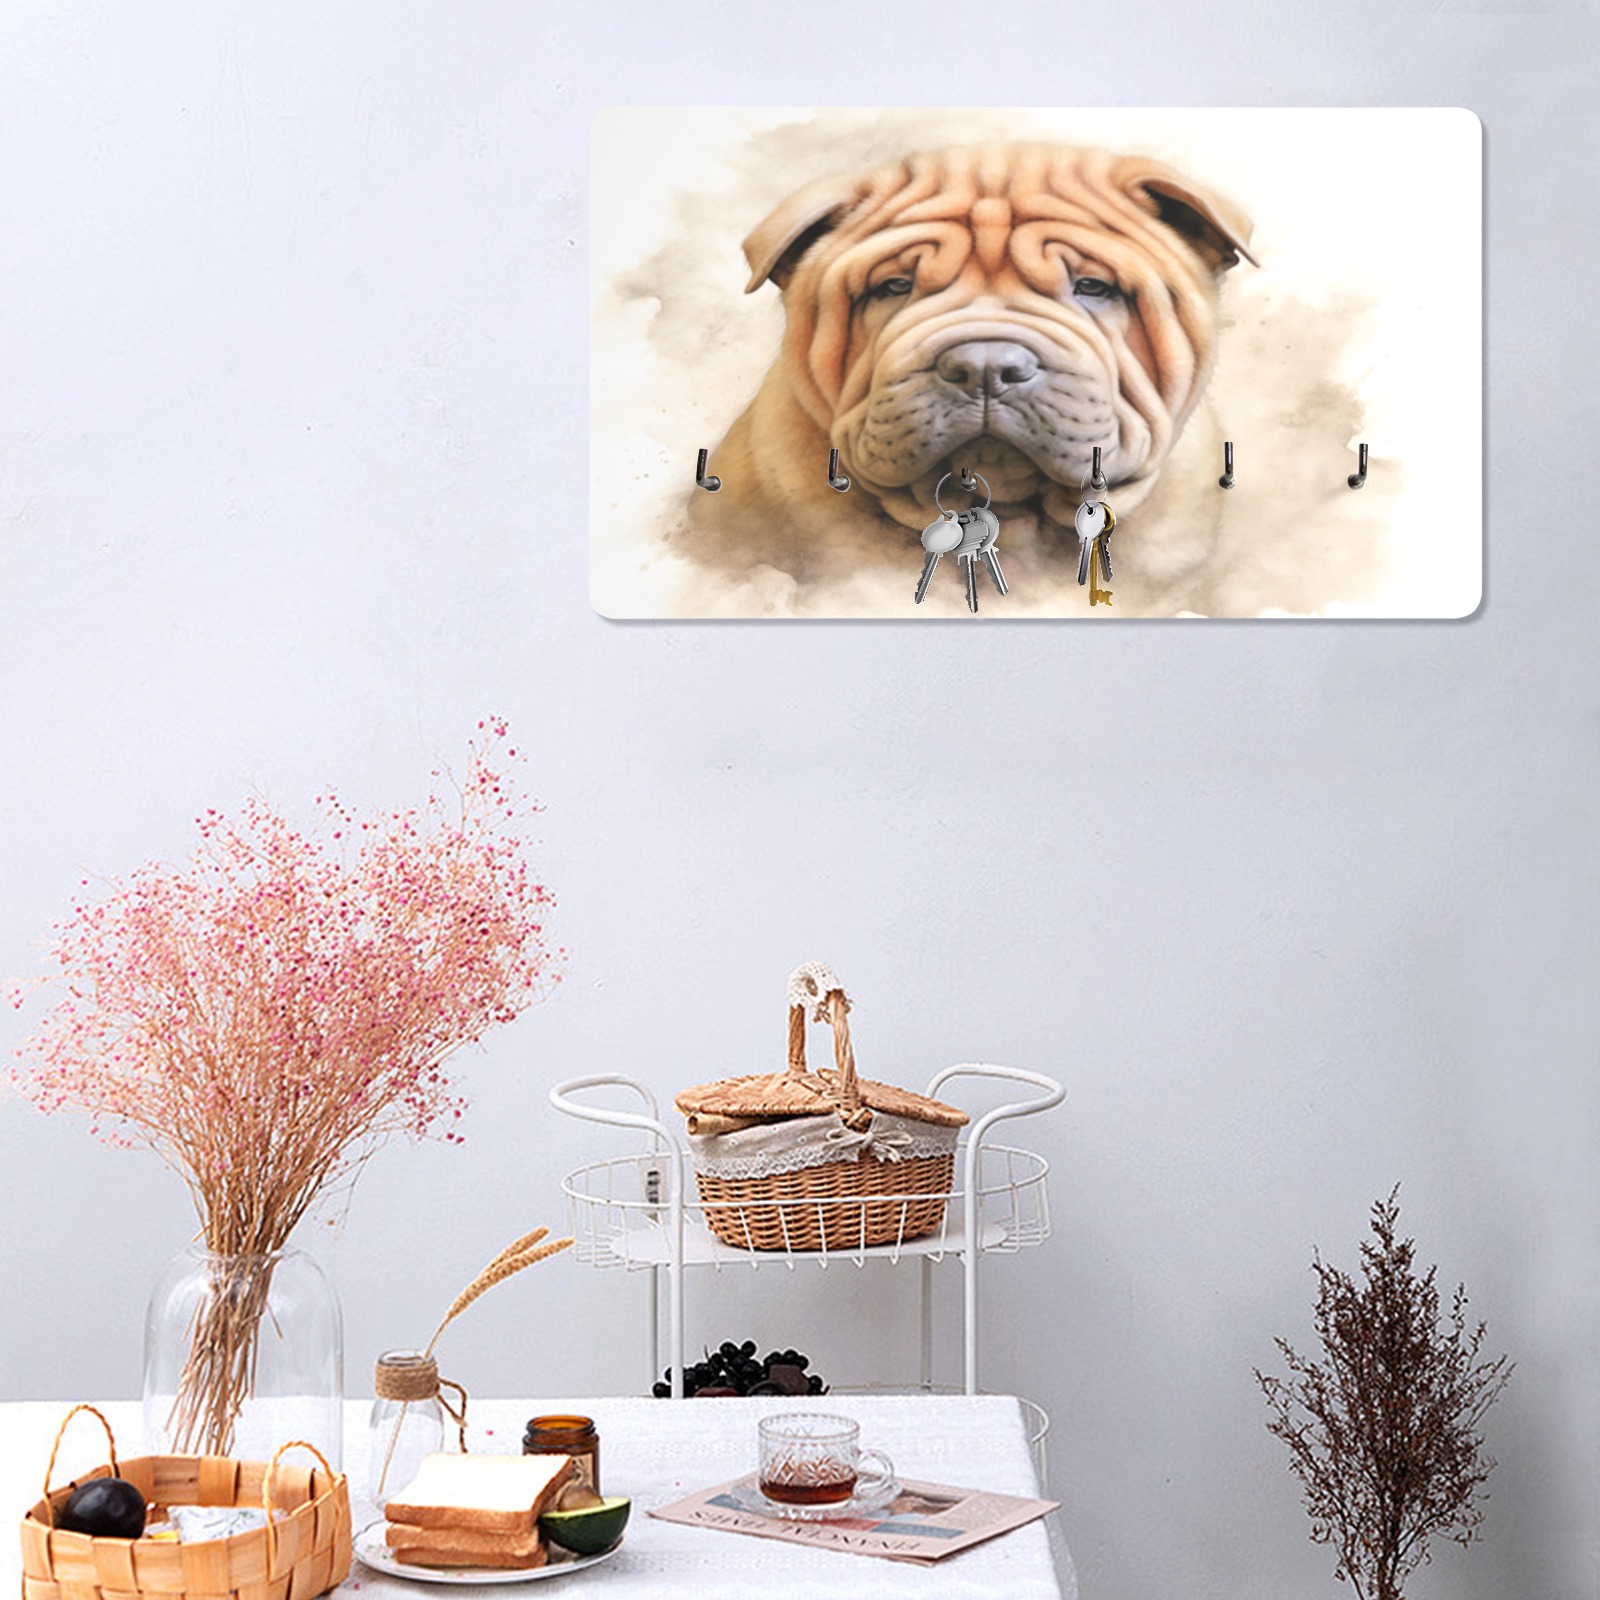 Chow Chow Wall Mounted Decor Key Holder